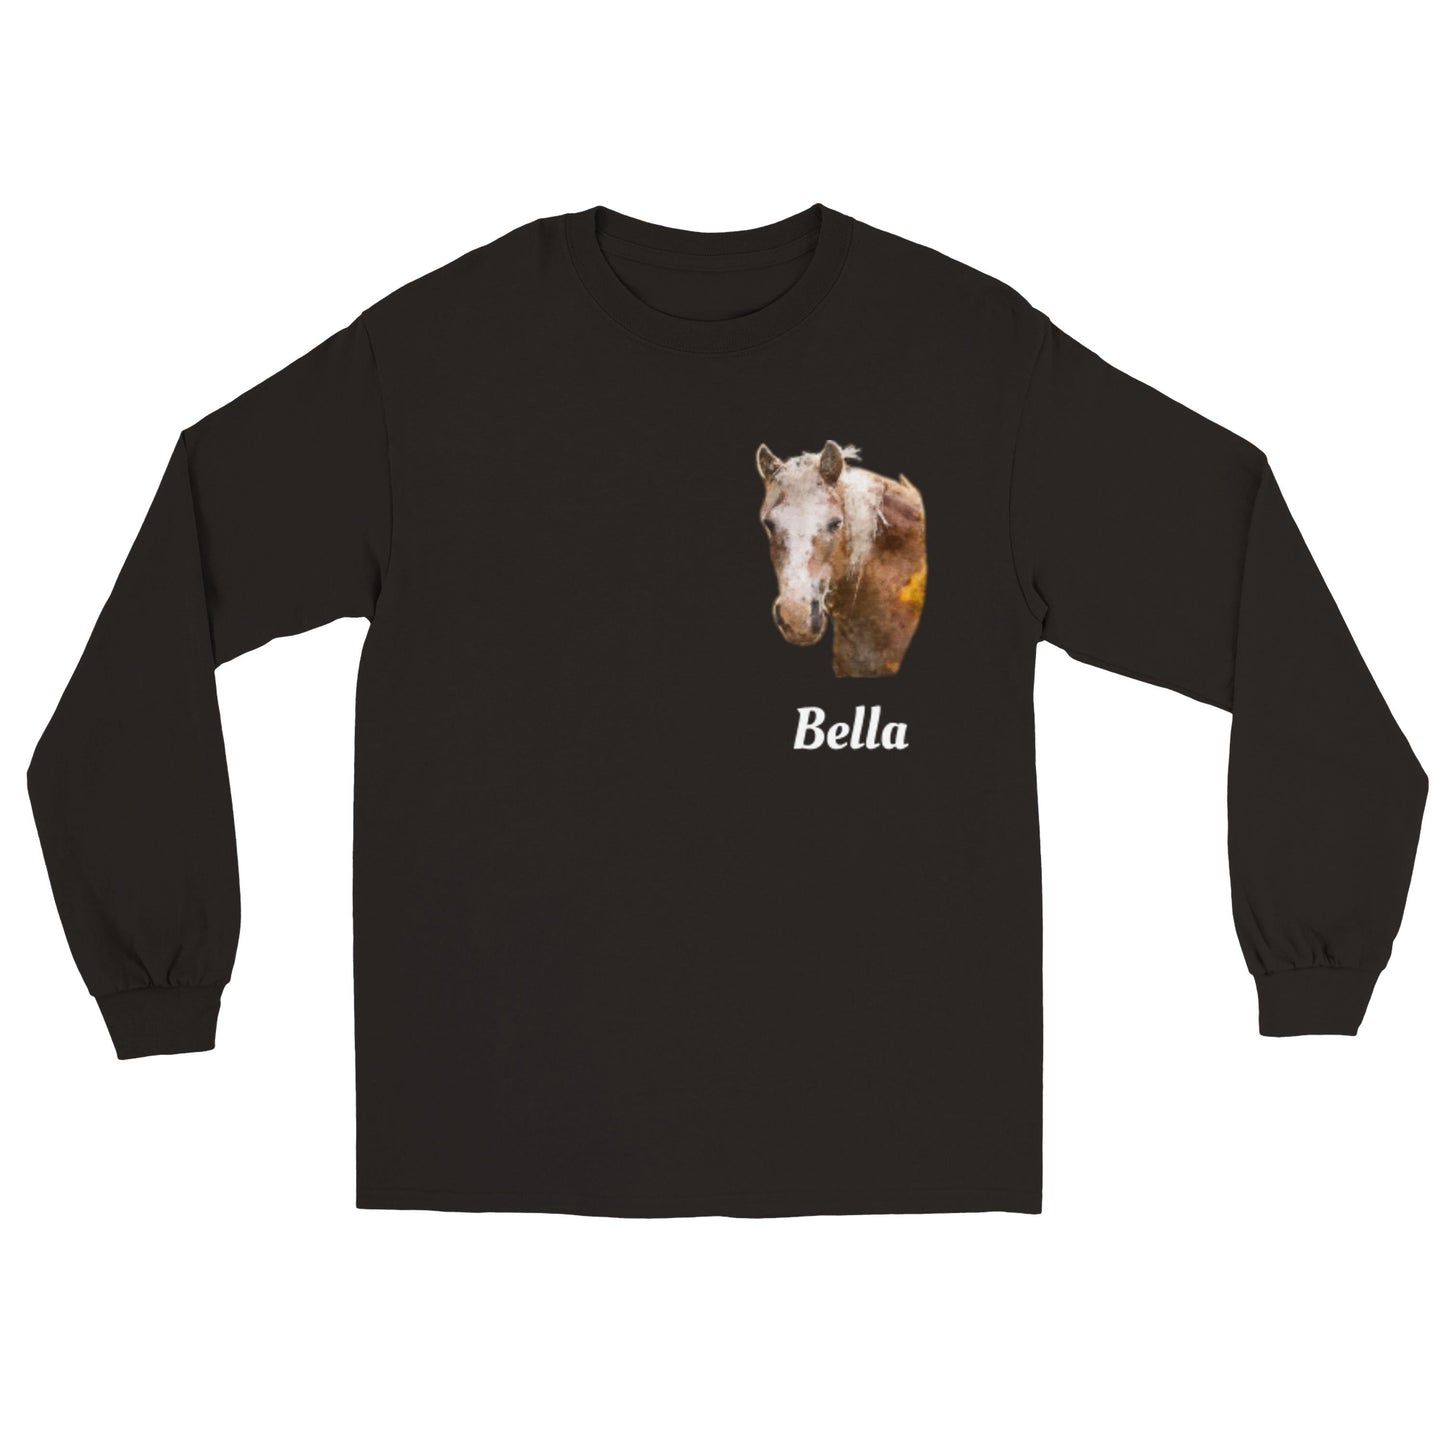 Hand Drawn Horse || Unisex Longsleeve T-shirt - Oil Painting - Personalized; Personalized with your horse